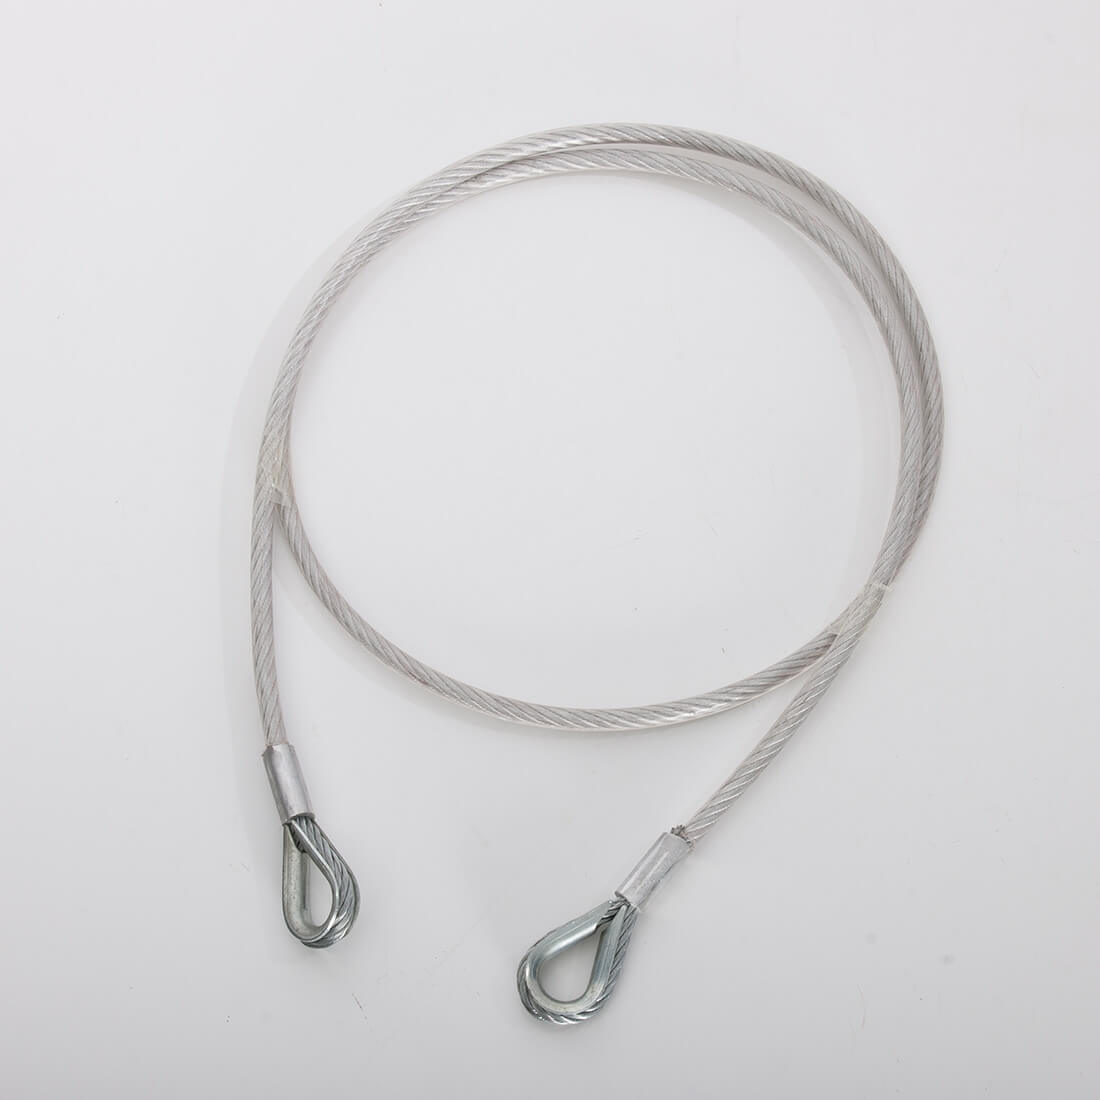 Cable Anchorage Sling - Personal protection